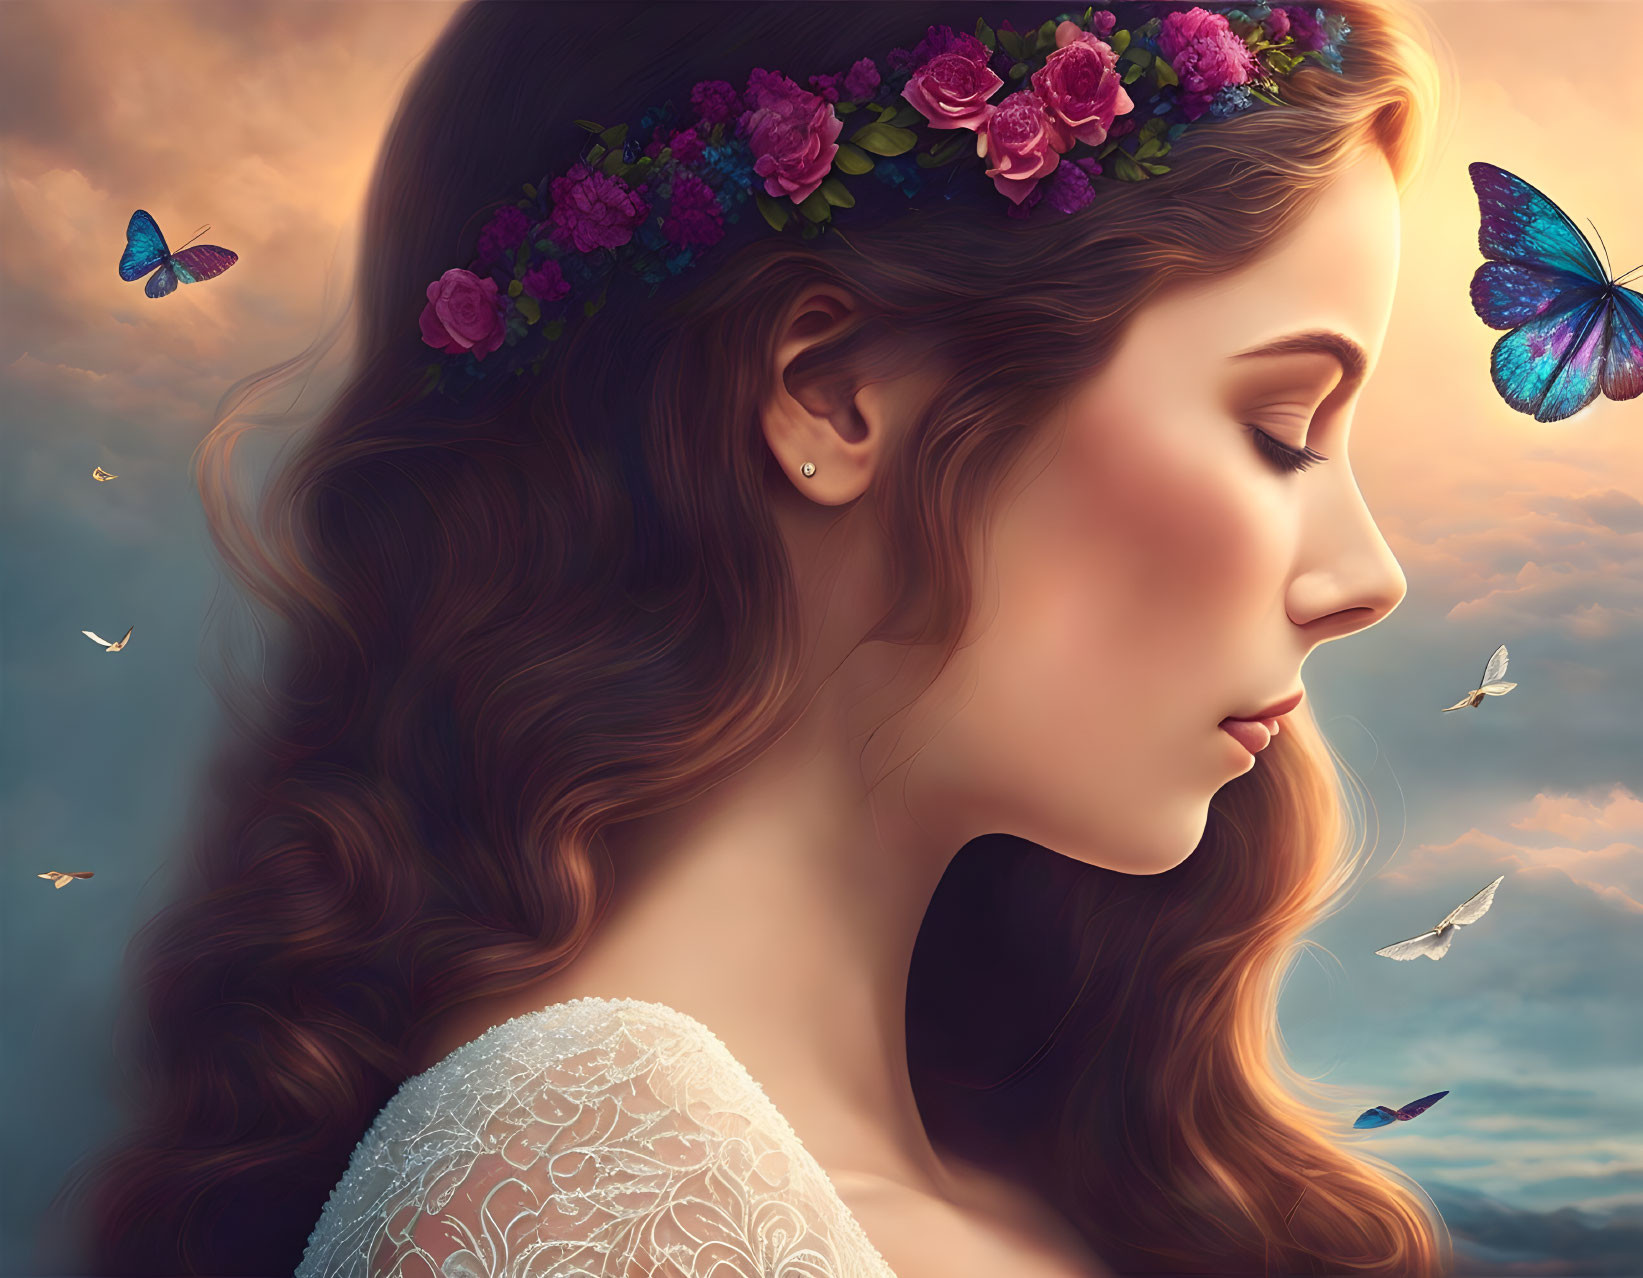 Woman with Floral Crown and Butterflies in Sunset Sky